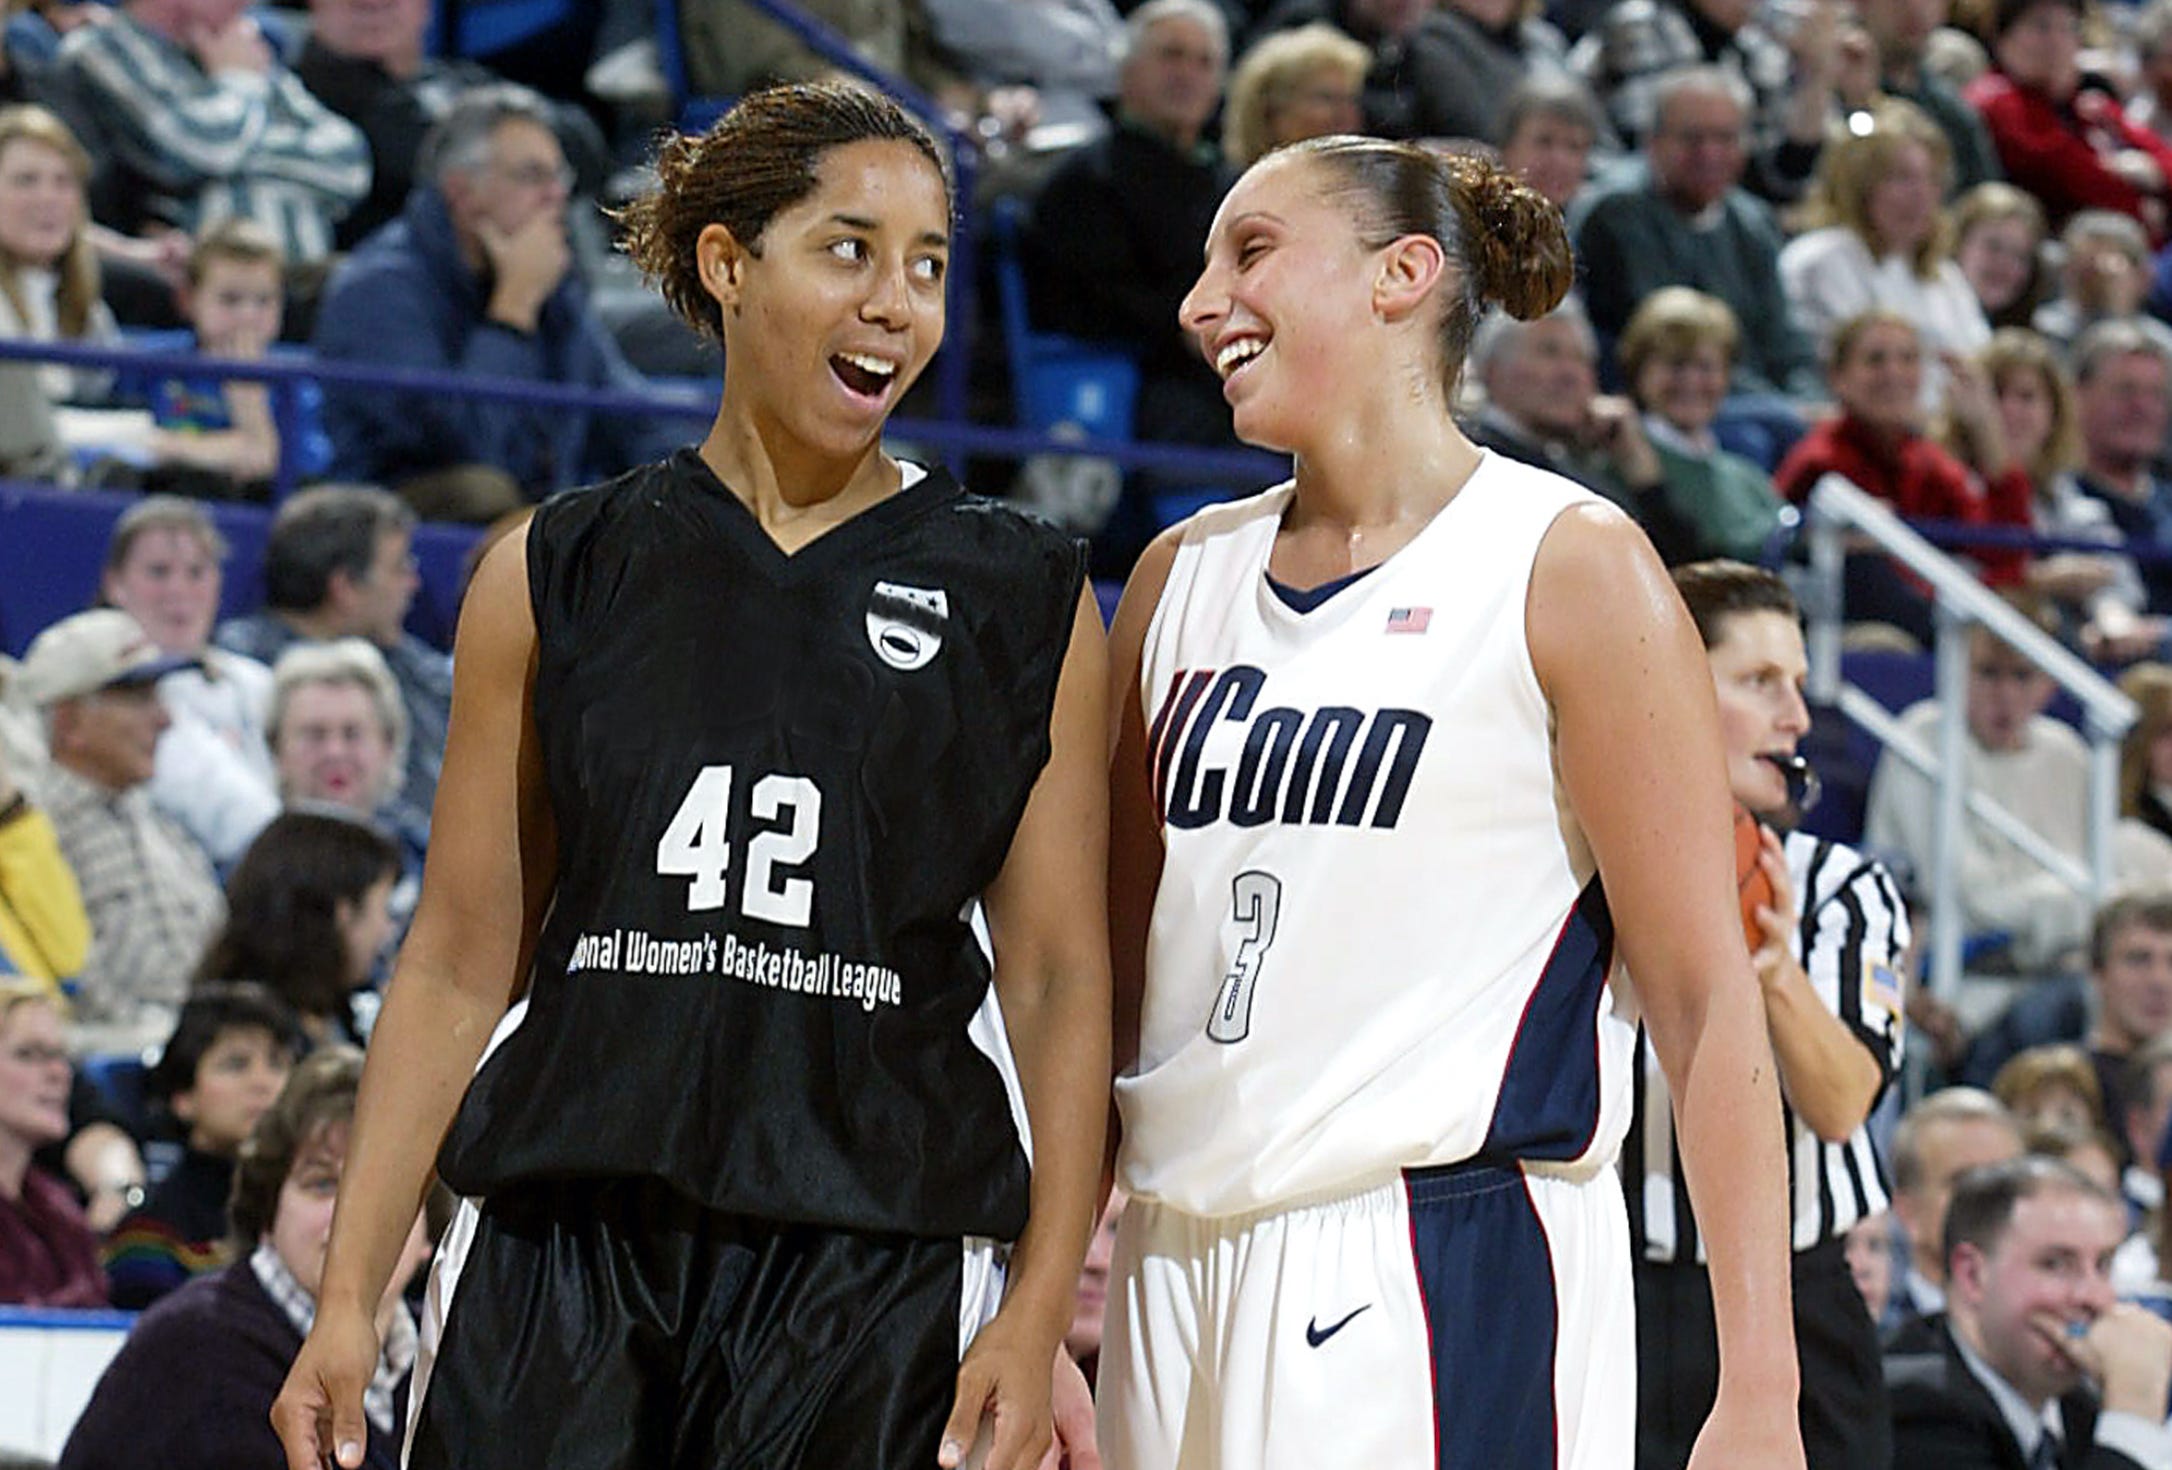 A definitive ranking of UConn's best uniforms